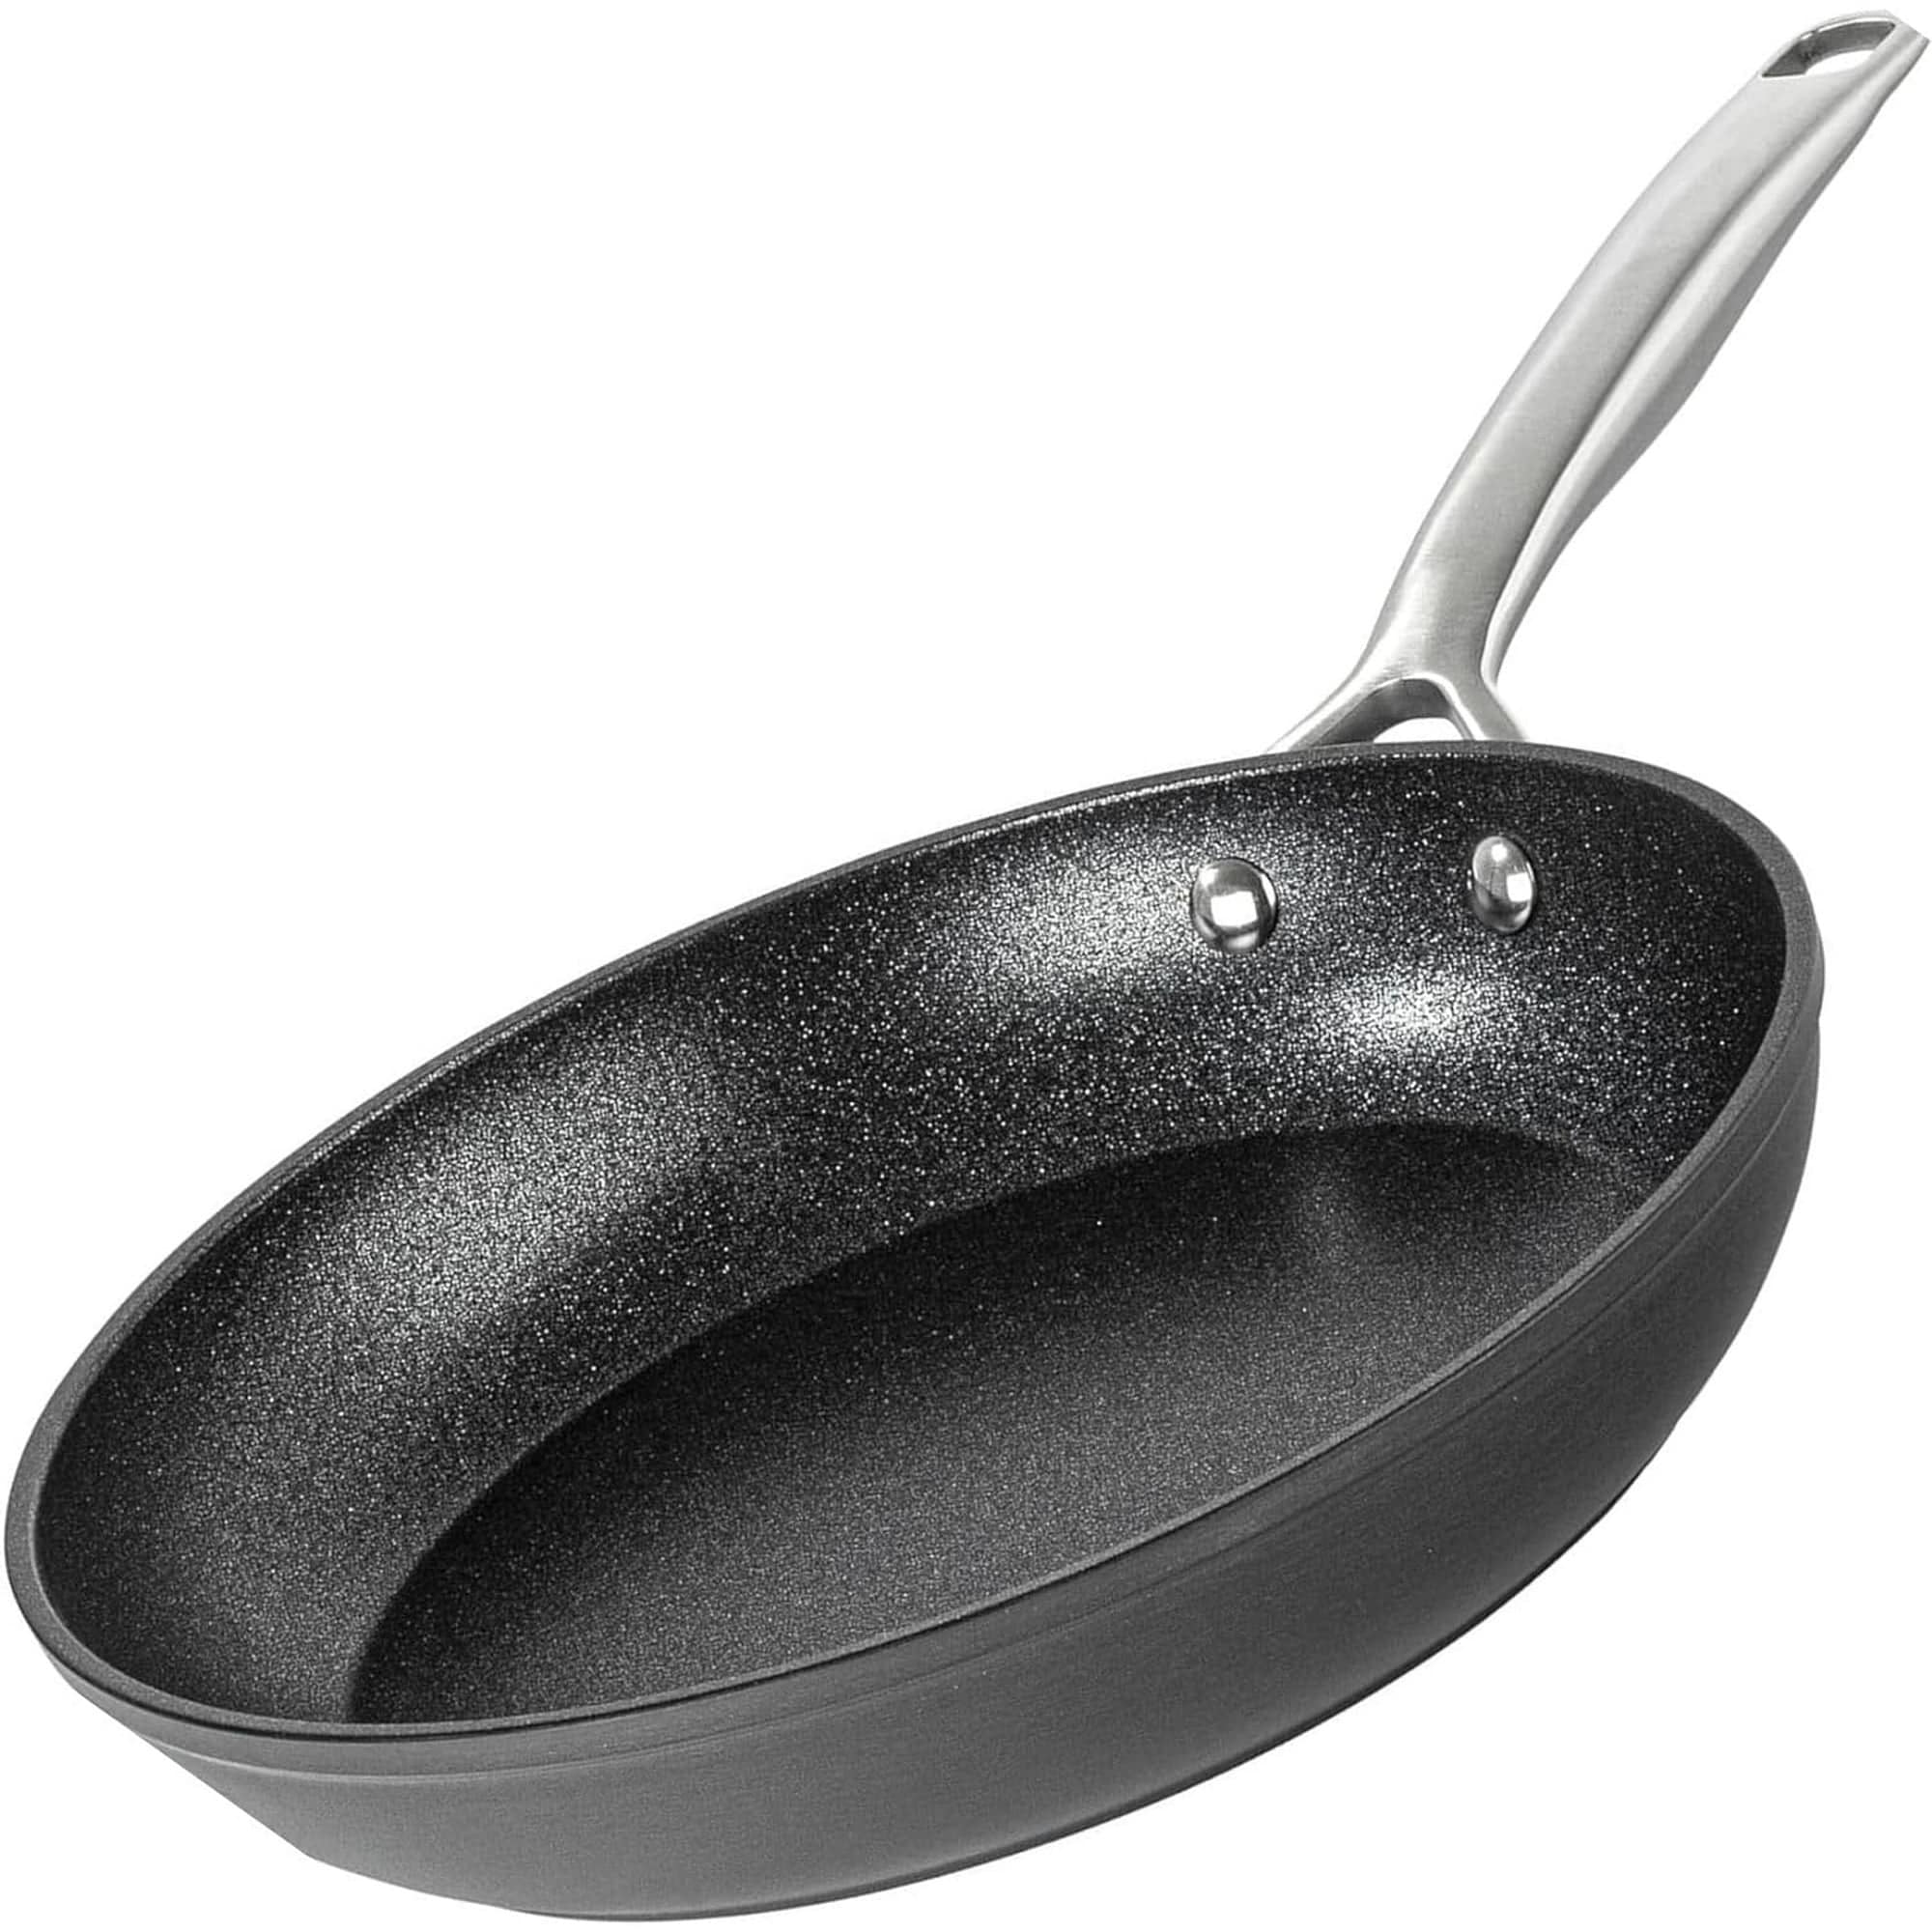 https://ak1.ostkcdn.com/images/products/is/images/direct/d4bf721d3c0306f67da767e37ca01af044b20075/Granitestone-Armor-Max-10-in-Fry-Pan.jpg